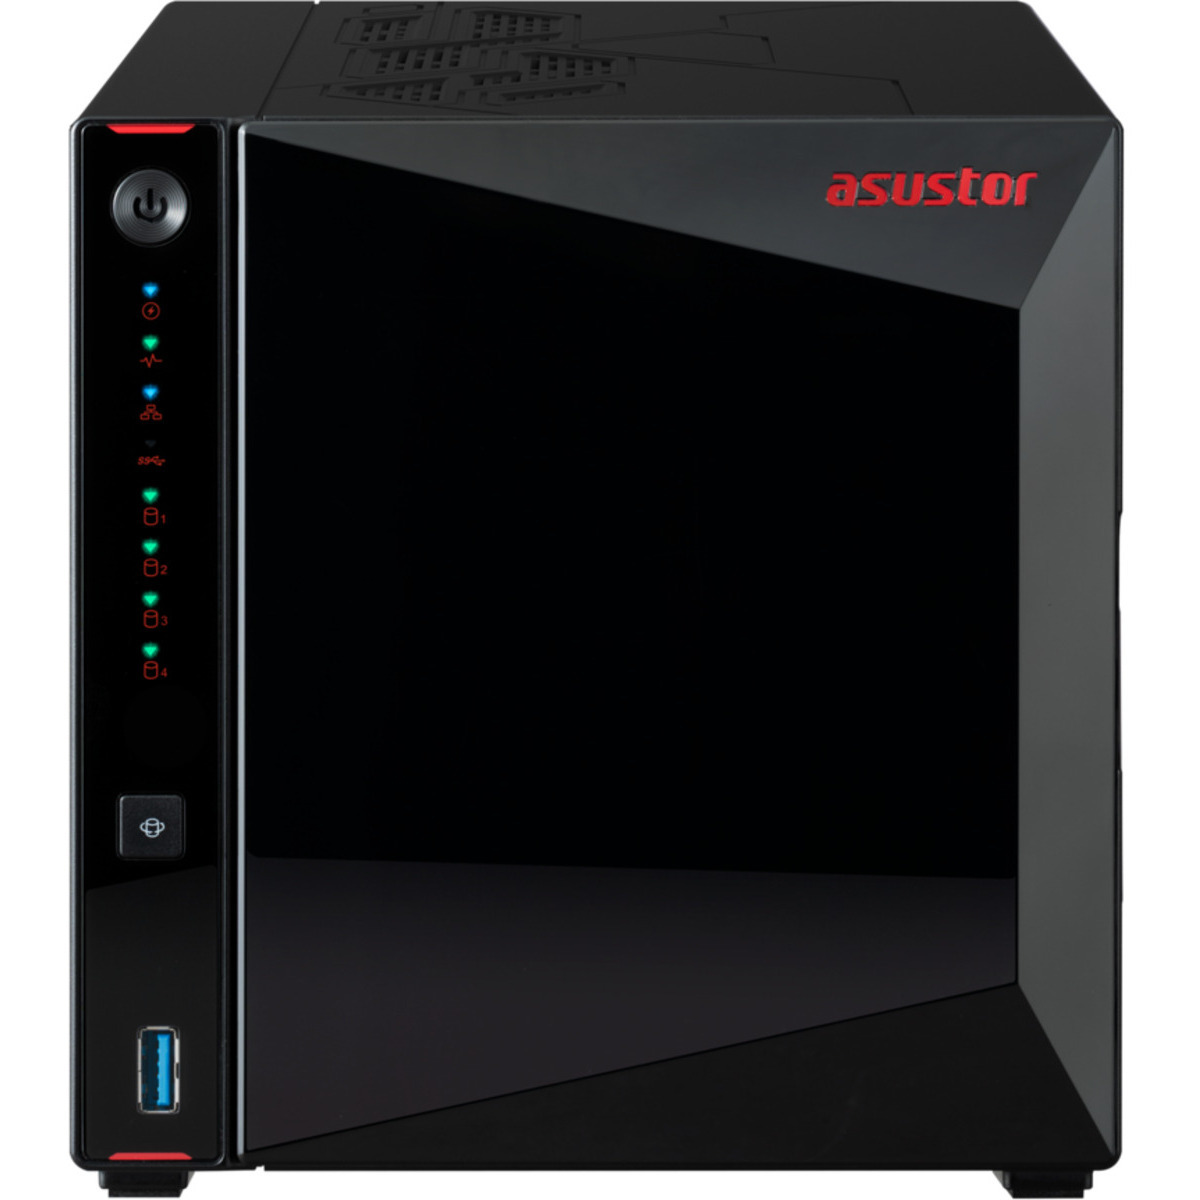 ASUSTOR Nimbustor 4 Gen2 AS5404T 24tb 4-Bay Desktop Multimedia / Power User / Business NAS - Network Attached Storage Device 4x6tb Seagate IronWolf ST6000VN006 3.5 5400rpm SATA 6Gb/s HDD NAS Class Drives Installed - Burn-In Tested - FREE RAM UPGRADE Nimbustor 4 Gen2 AS5404T